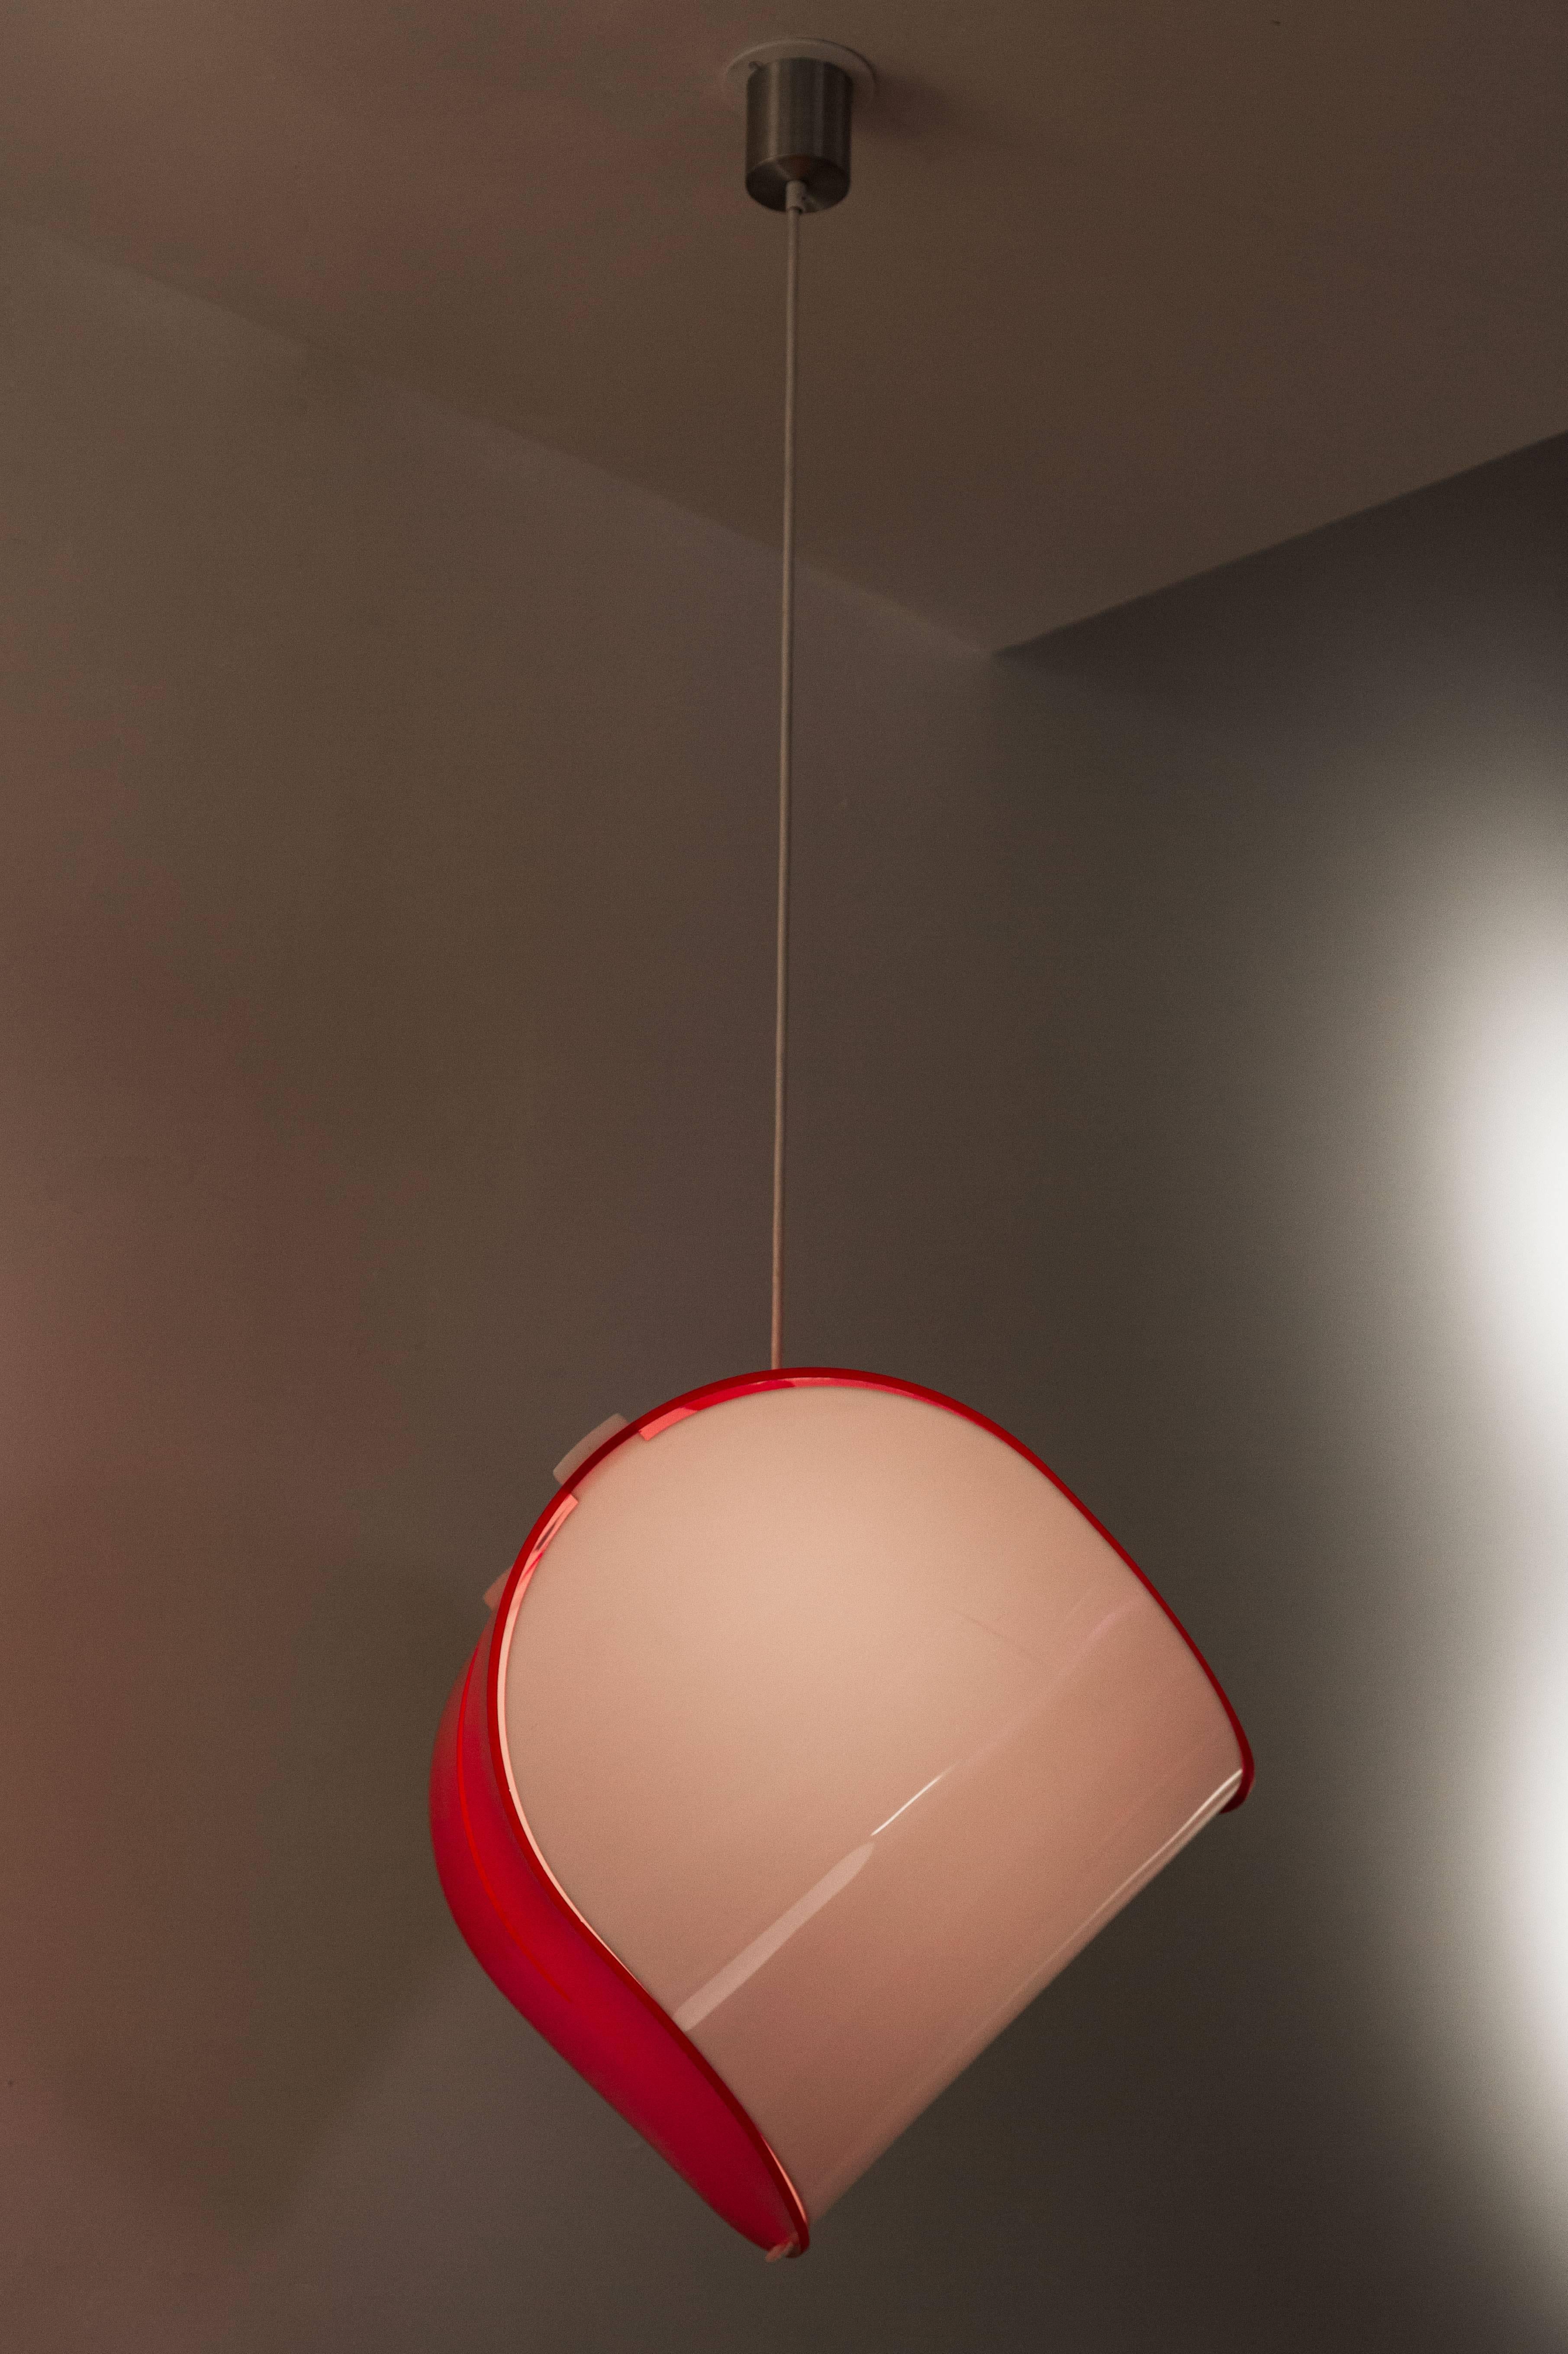 Red and white acrylic suspension lamp by Gerd Lange for Kartell, Milan. E27 75w maximum bulb. Overall drop can be adjusted. Original socket with new wire.